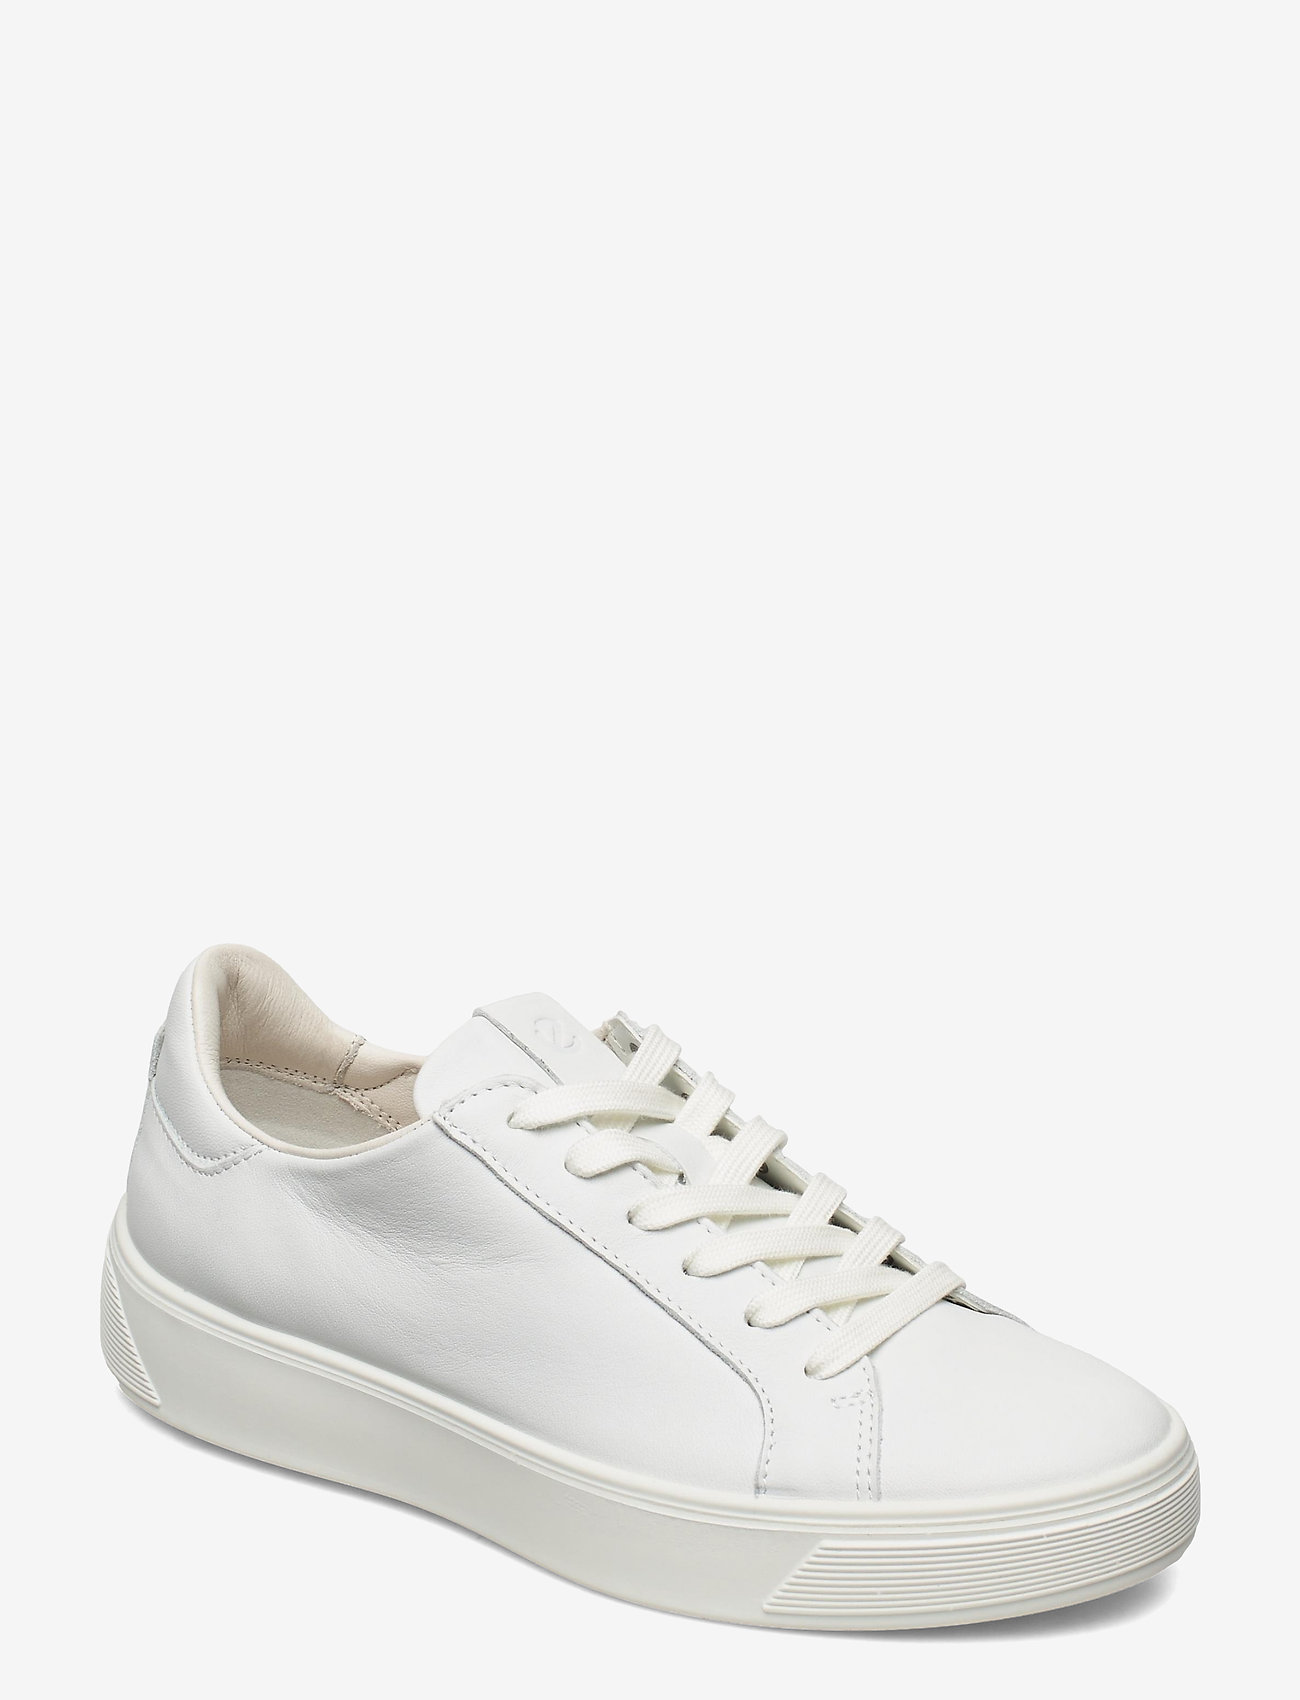 ECCO - STREET TRAY W - low top sneakers - white - 0